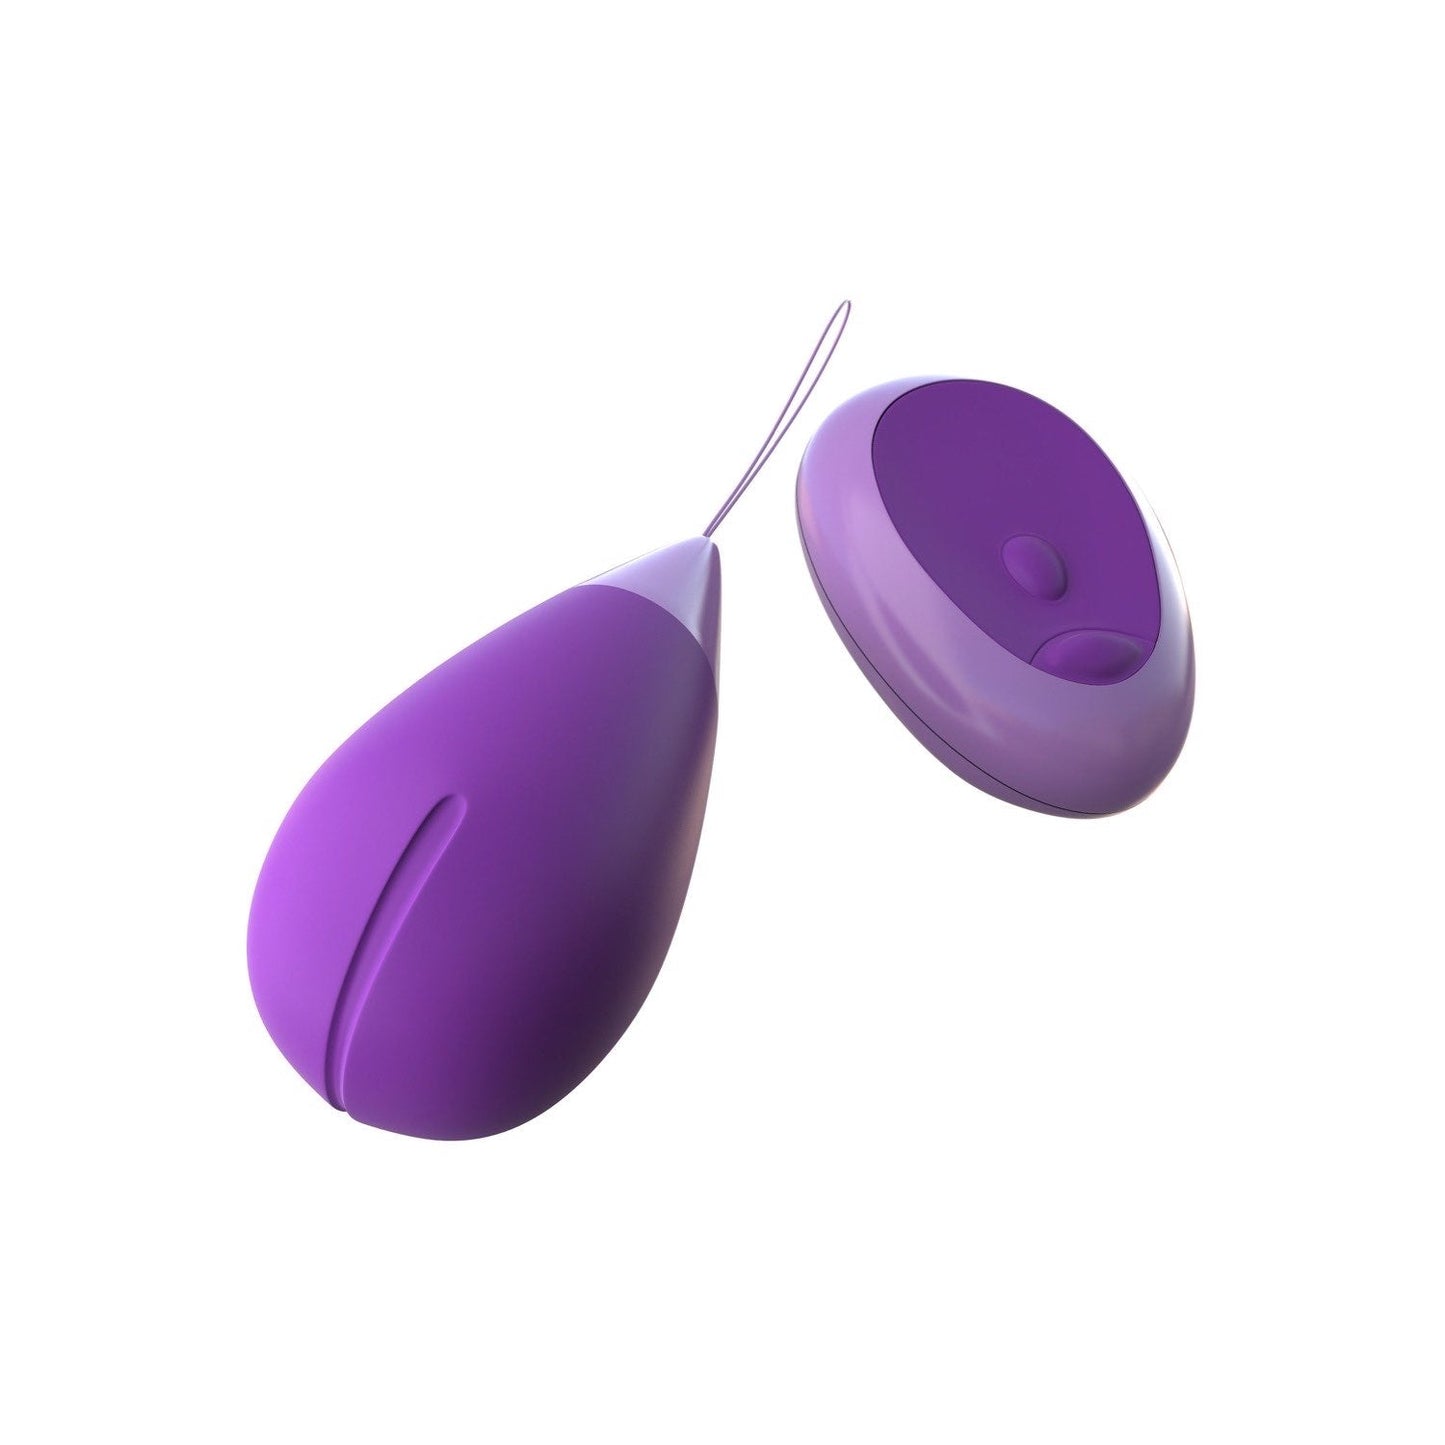 Remote Kegel Excite-Her - Purple USB Rechargeable Vibrating Kegel Trainer with Wireless Remote